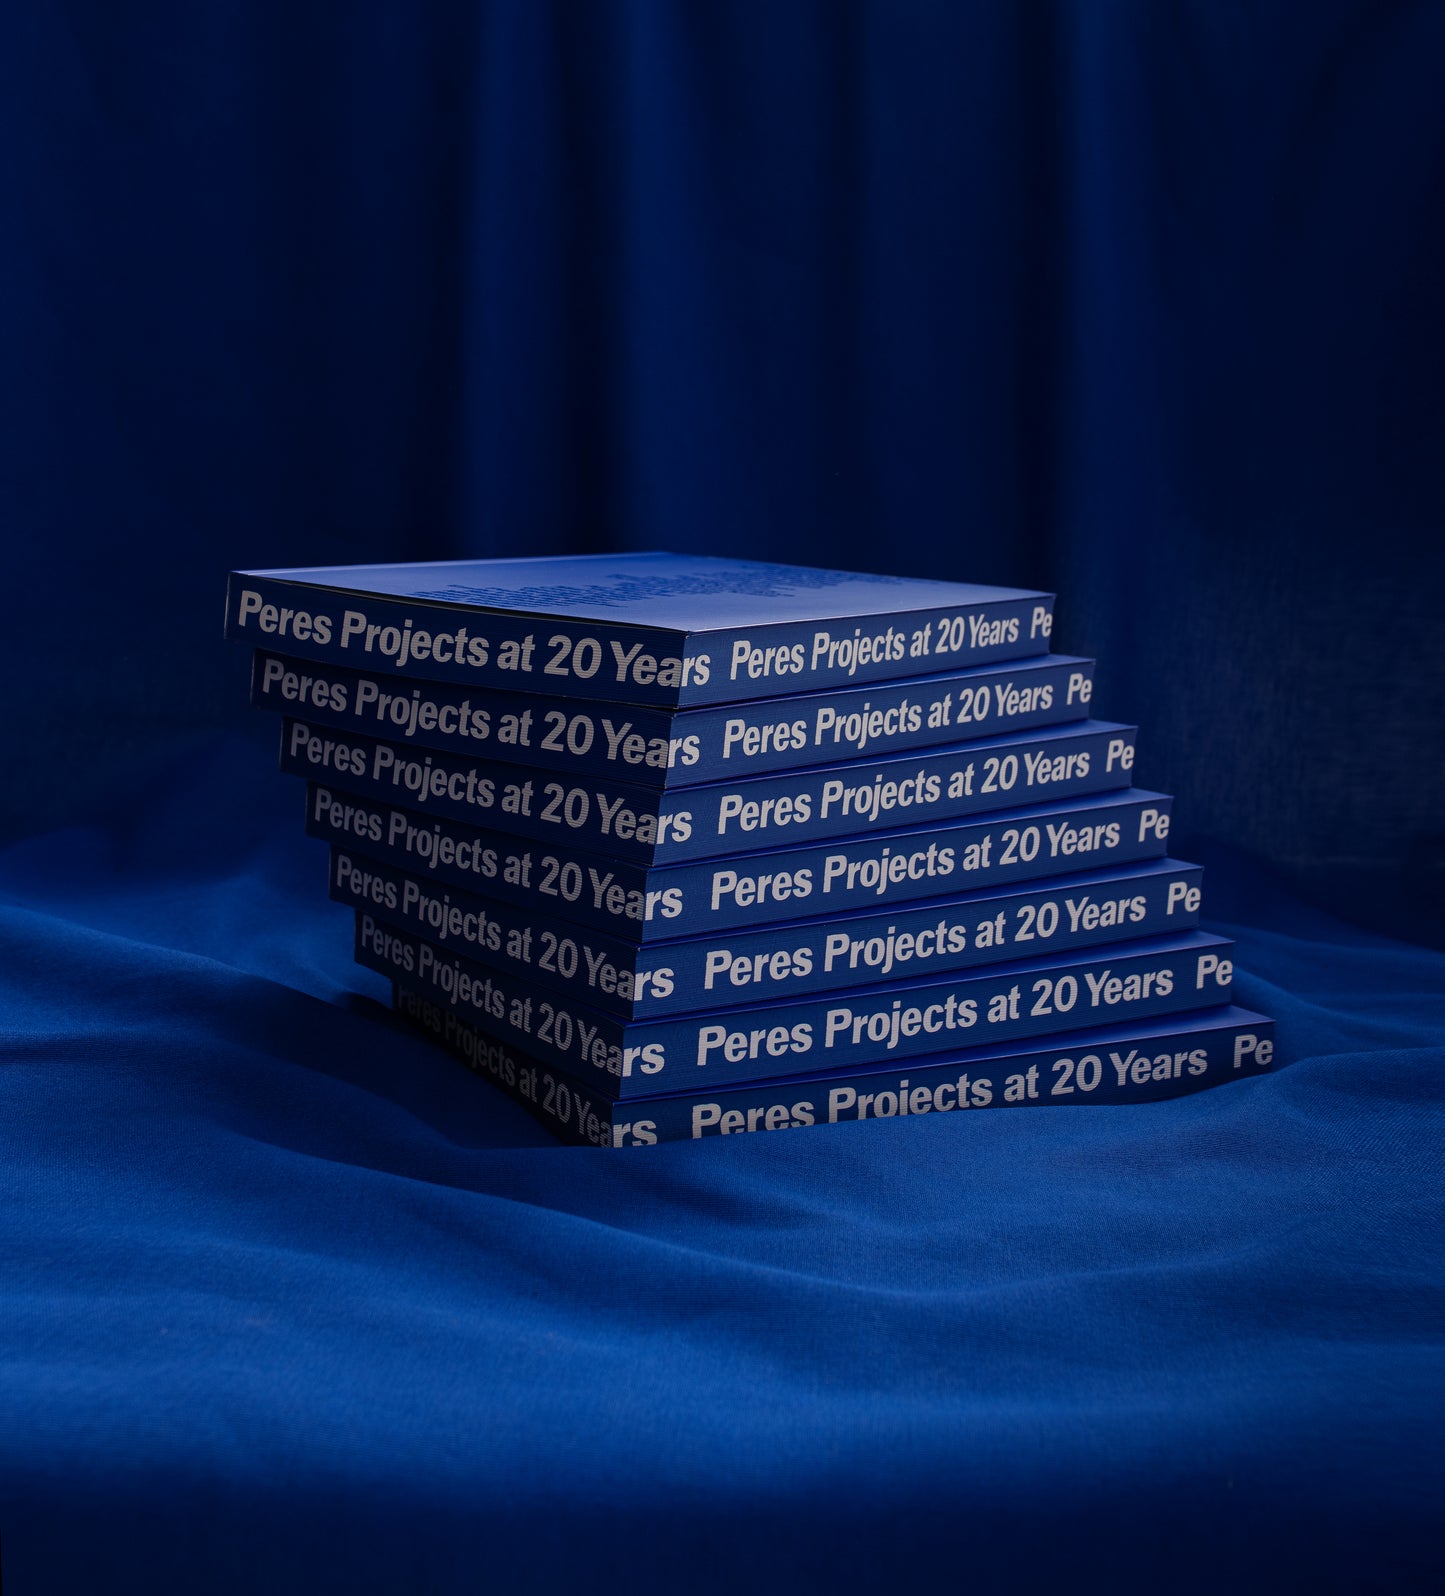 Peres Projects at 20 Years